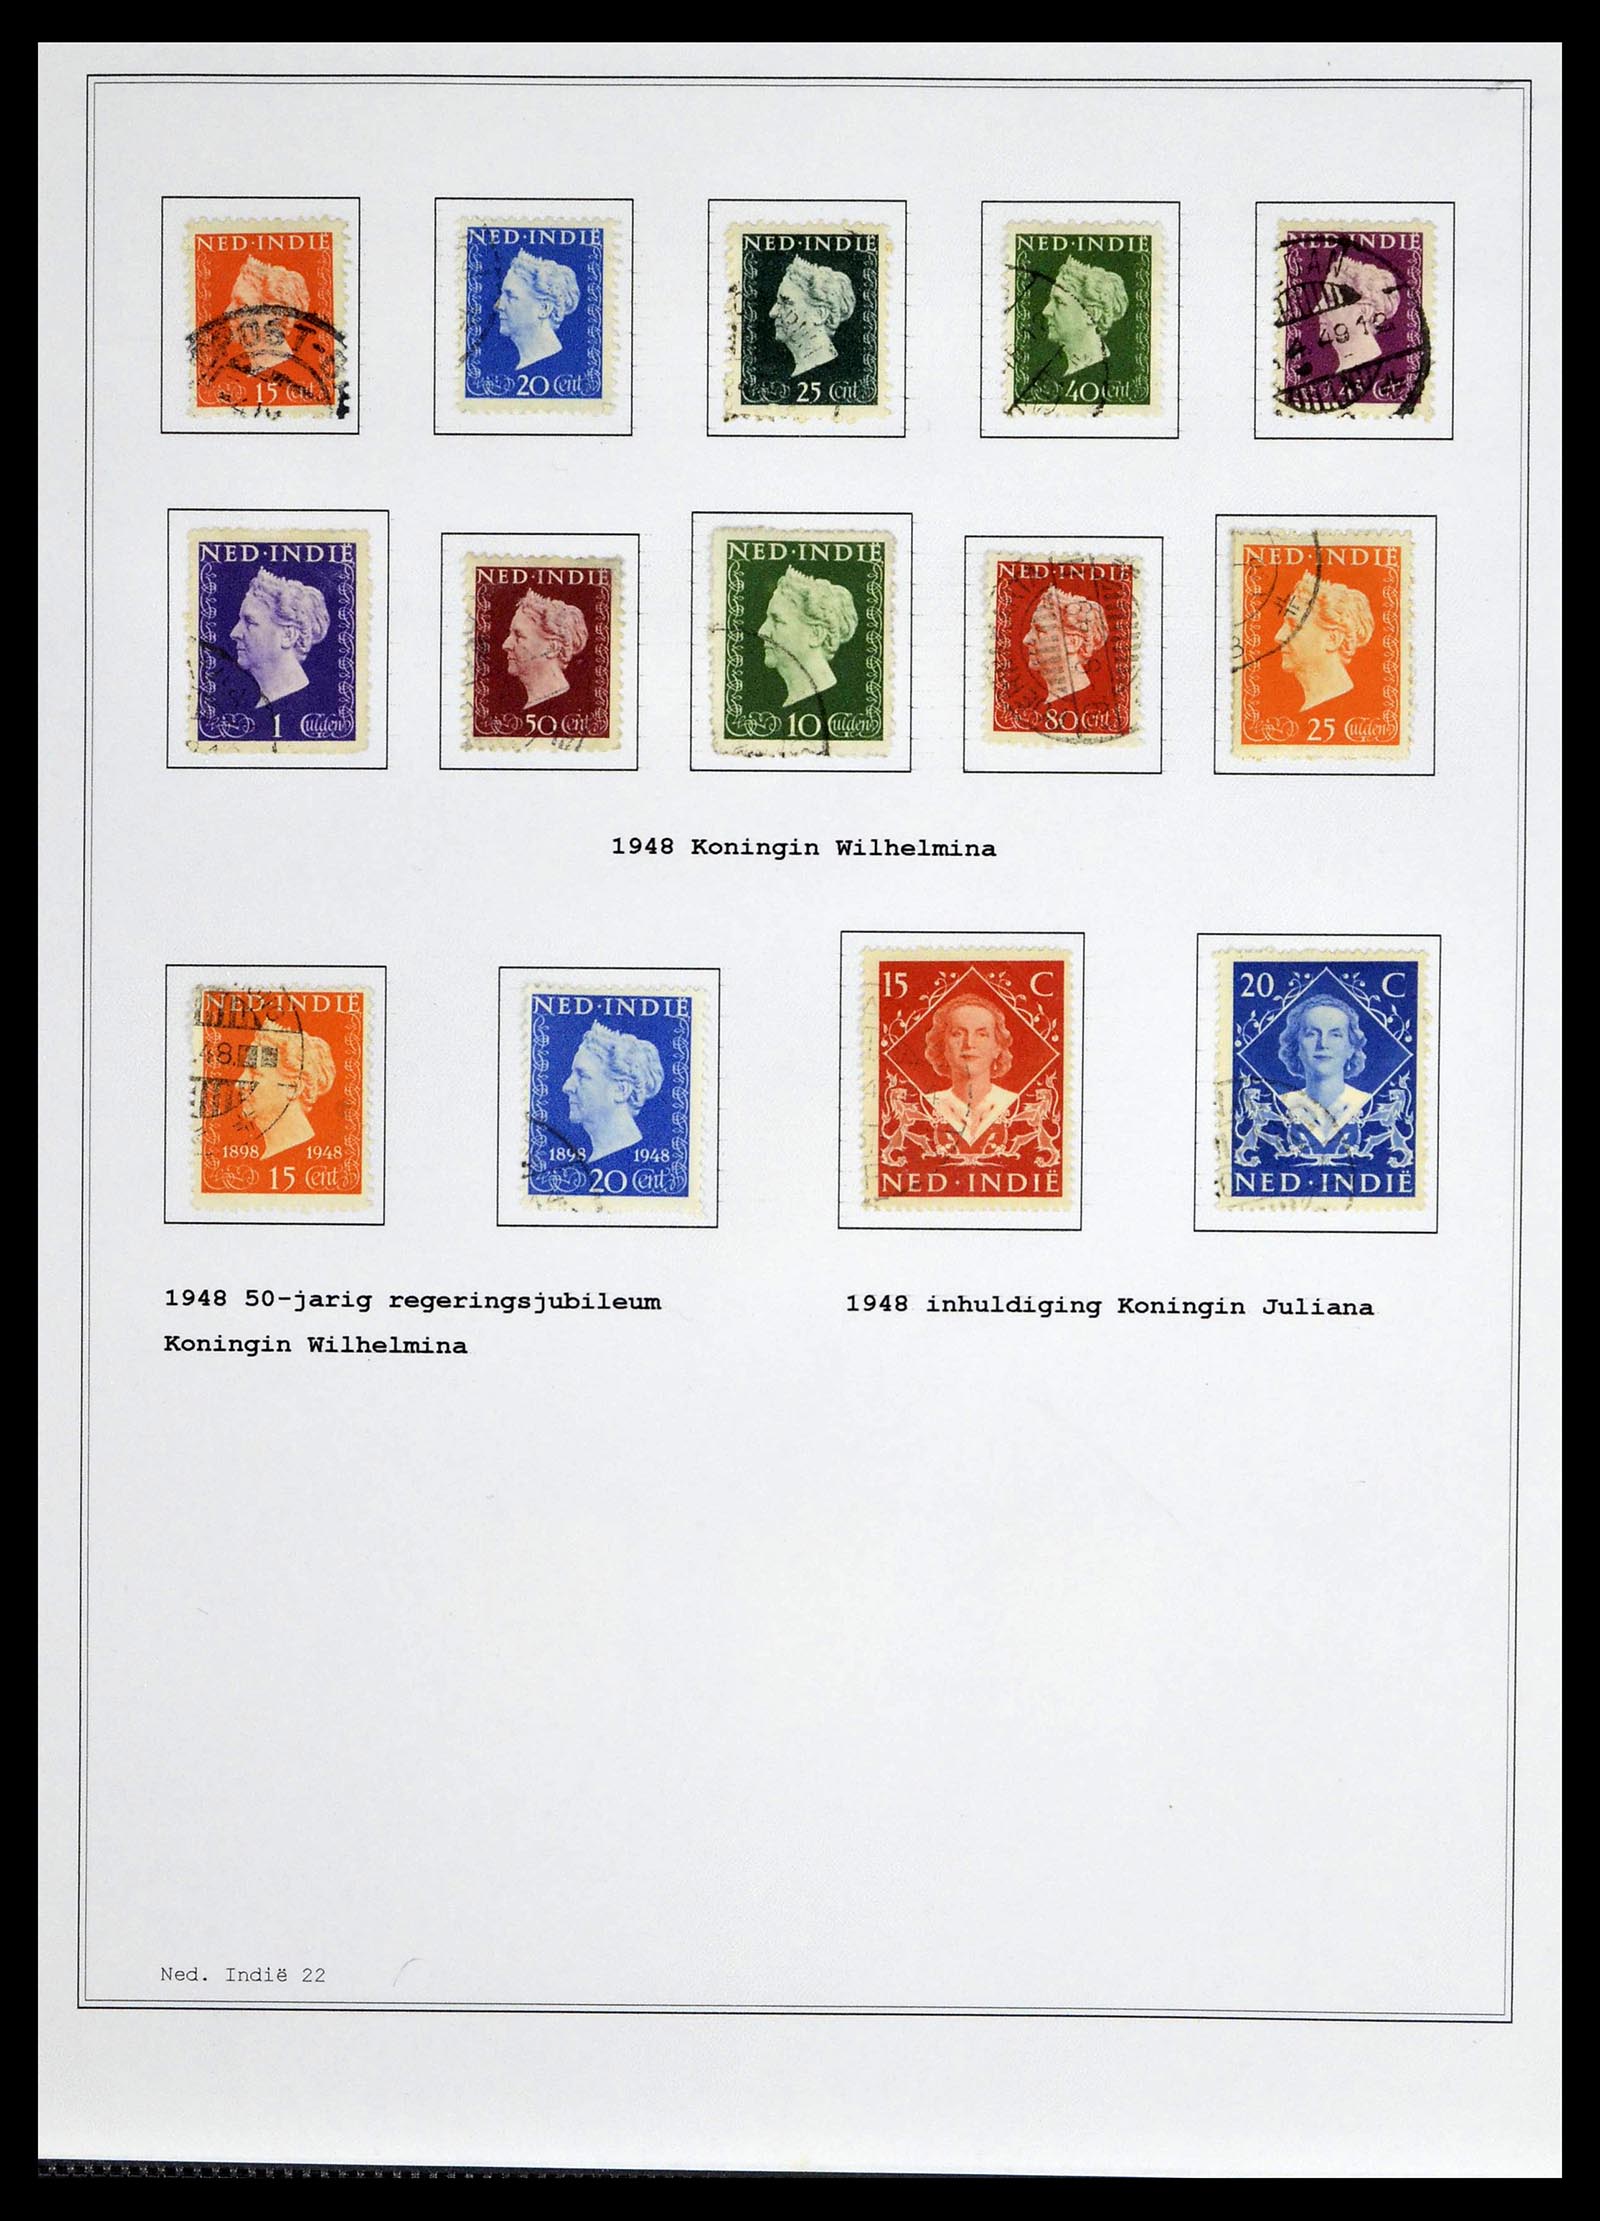 39026 0043 - Stamp collection 39026 Dutch east Indies and Suriname 1864-1975.